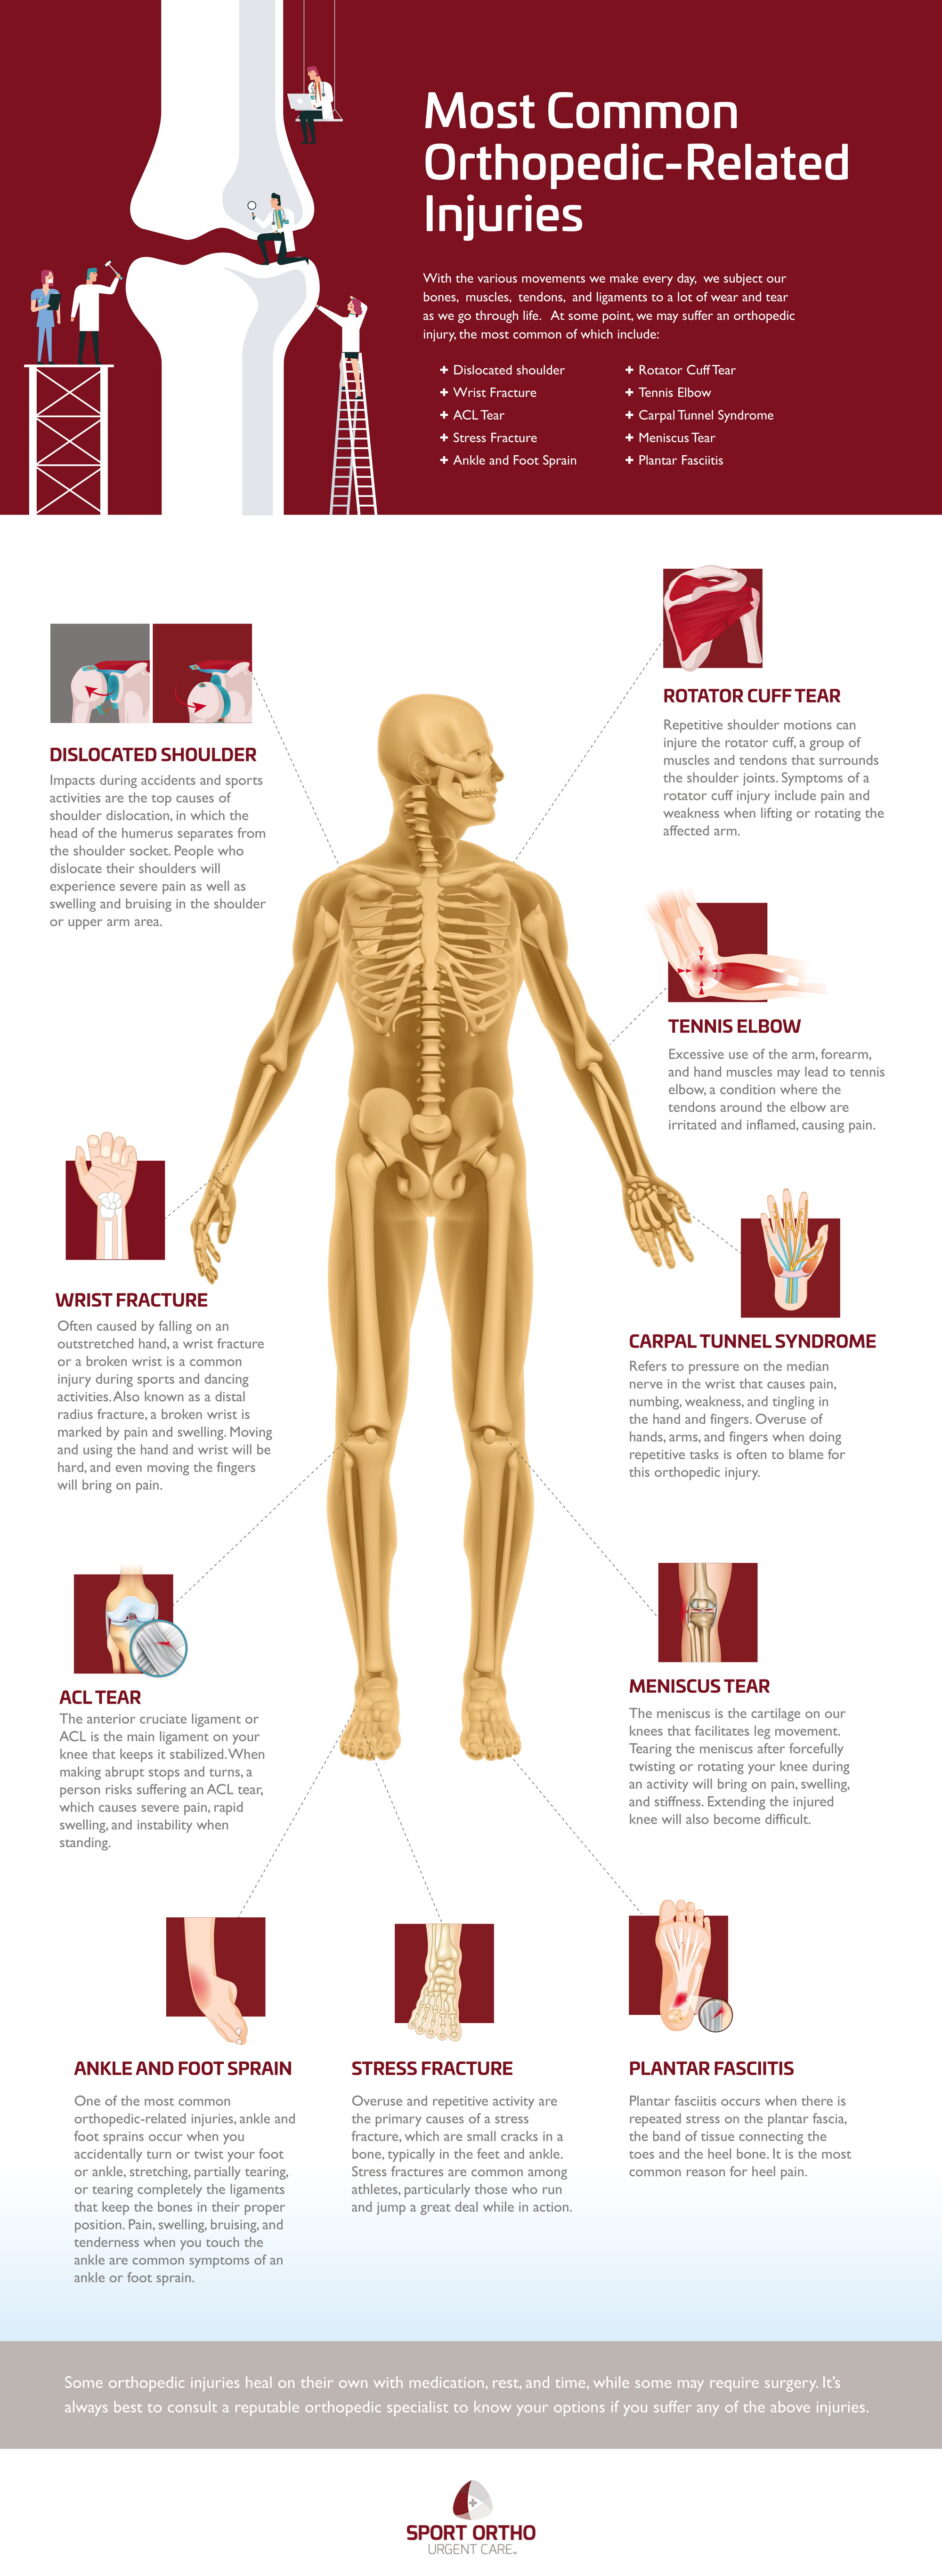 Most-Common-Orthopedic-Related-Injuries